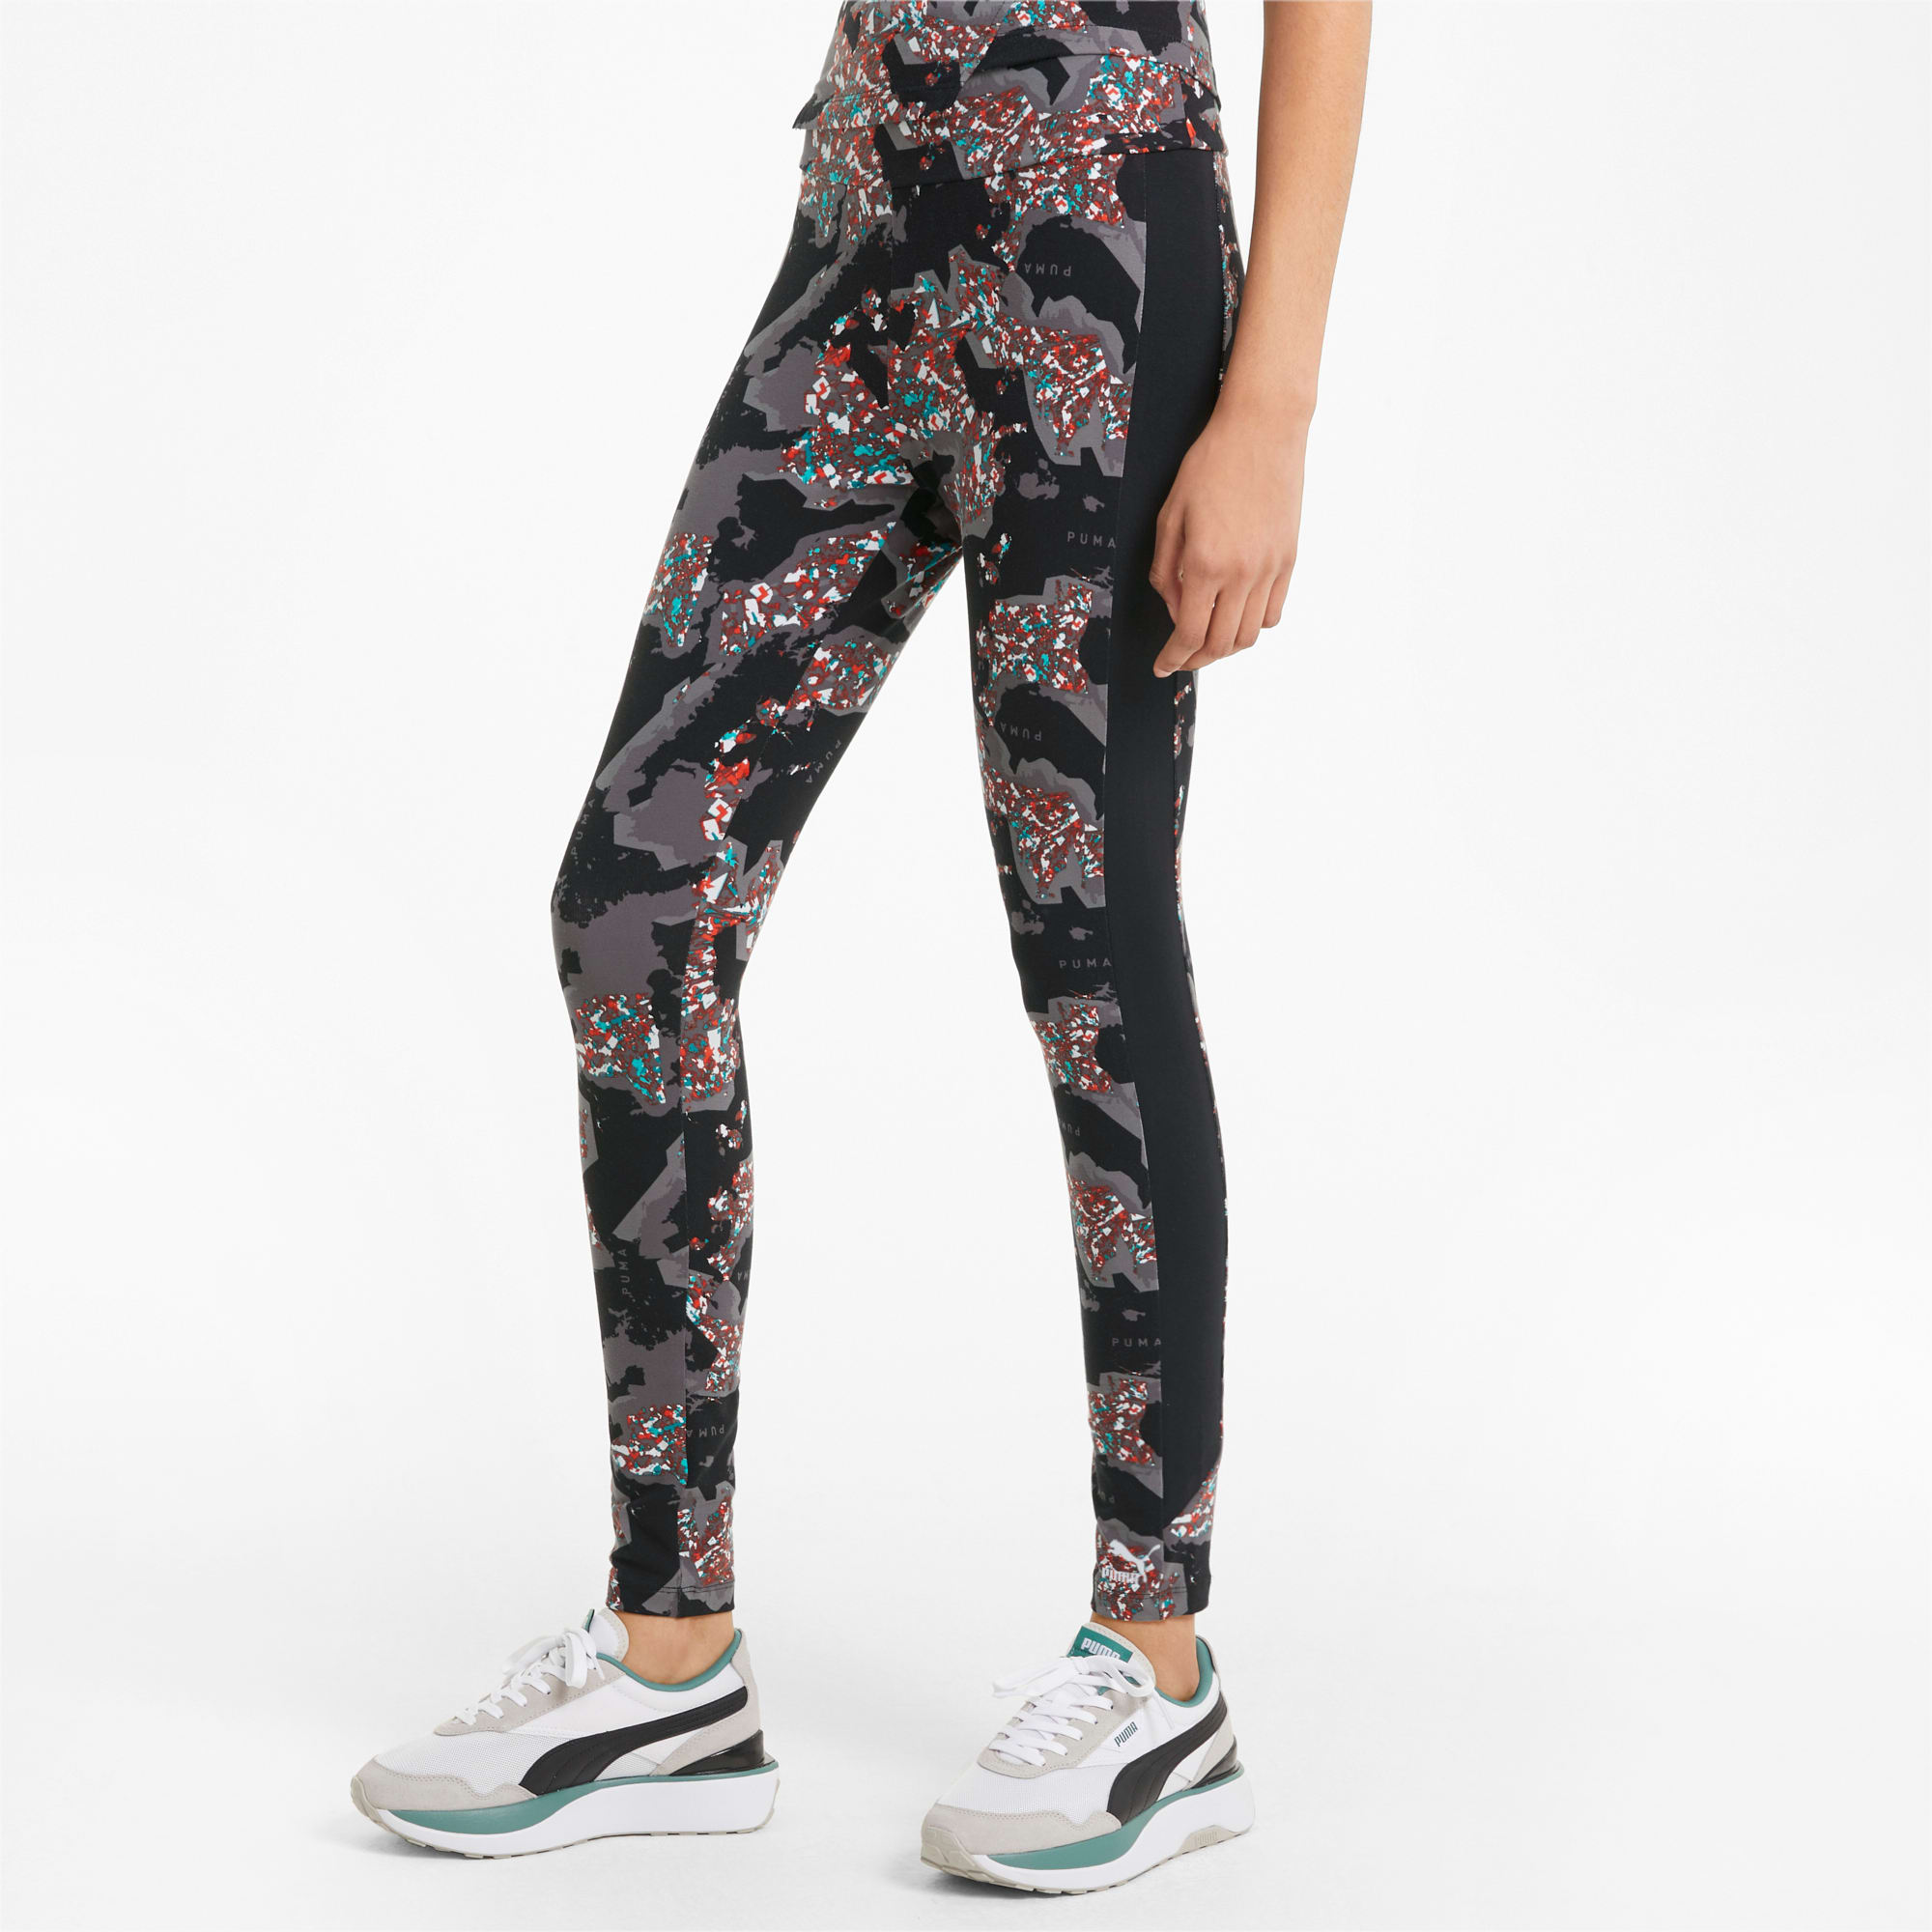 Puma Womens Amplified All Over Print Leggings 581225-01Black & White- Szs S  or M